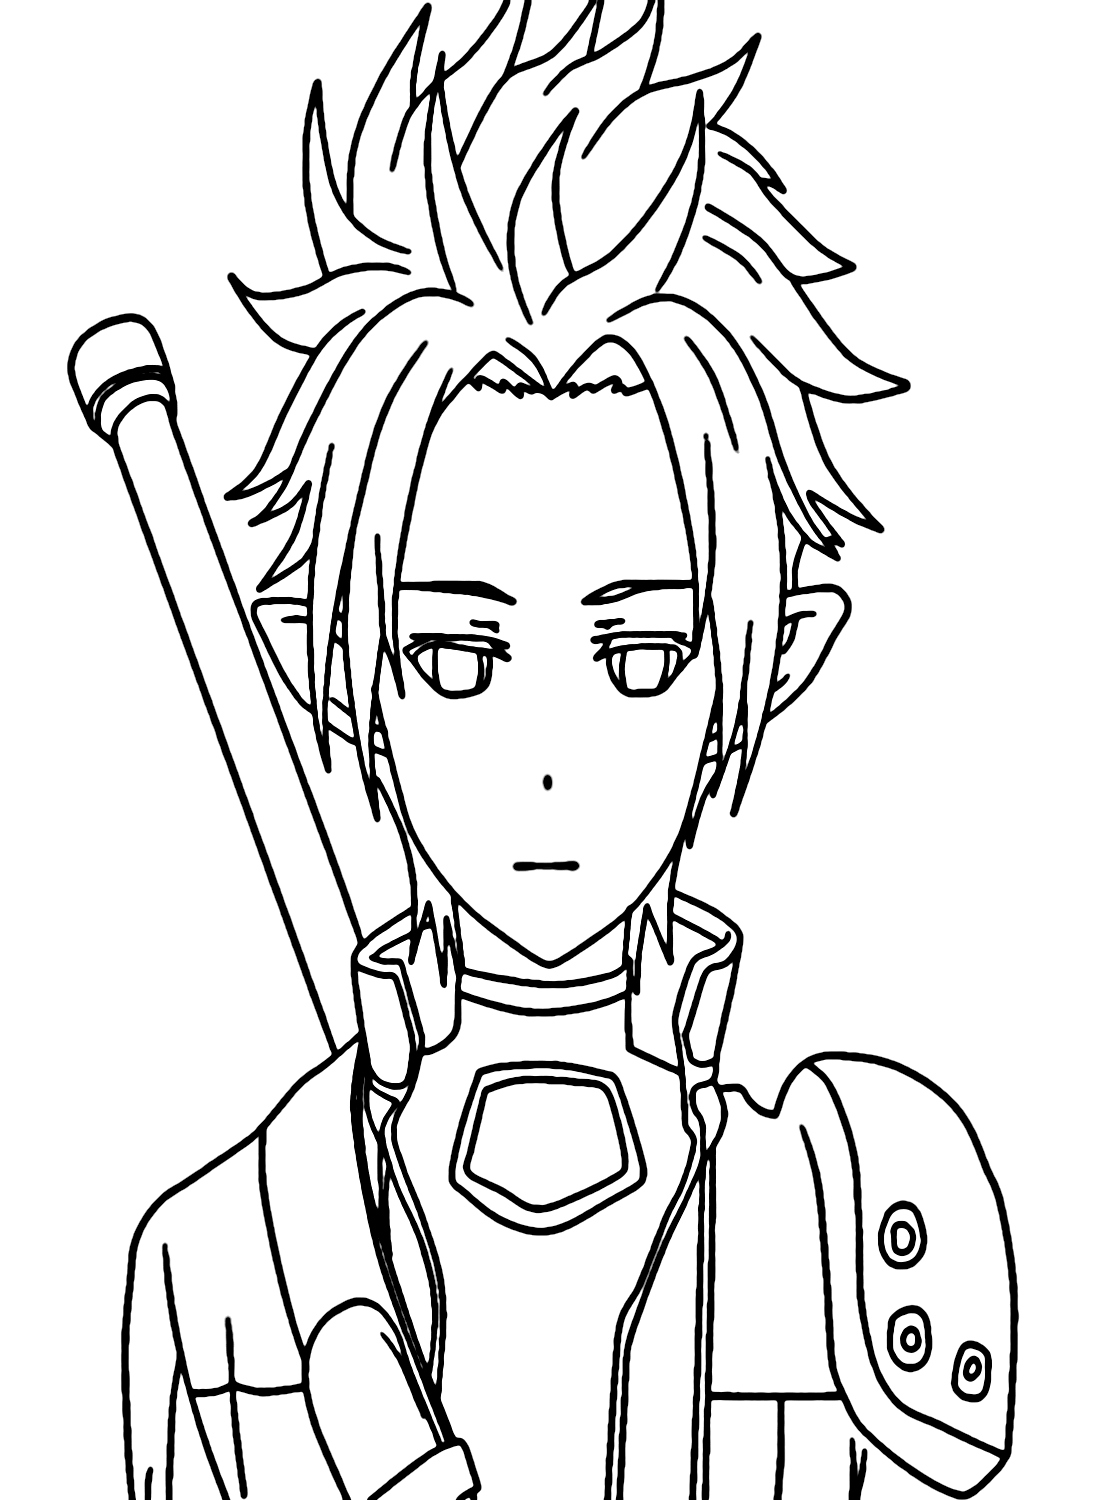 Kirito in Sword Art Online Coloring Pages